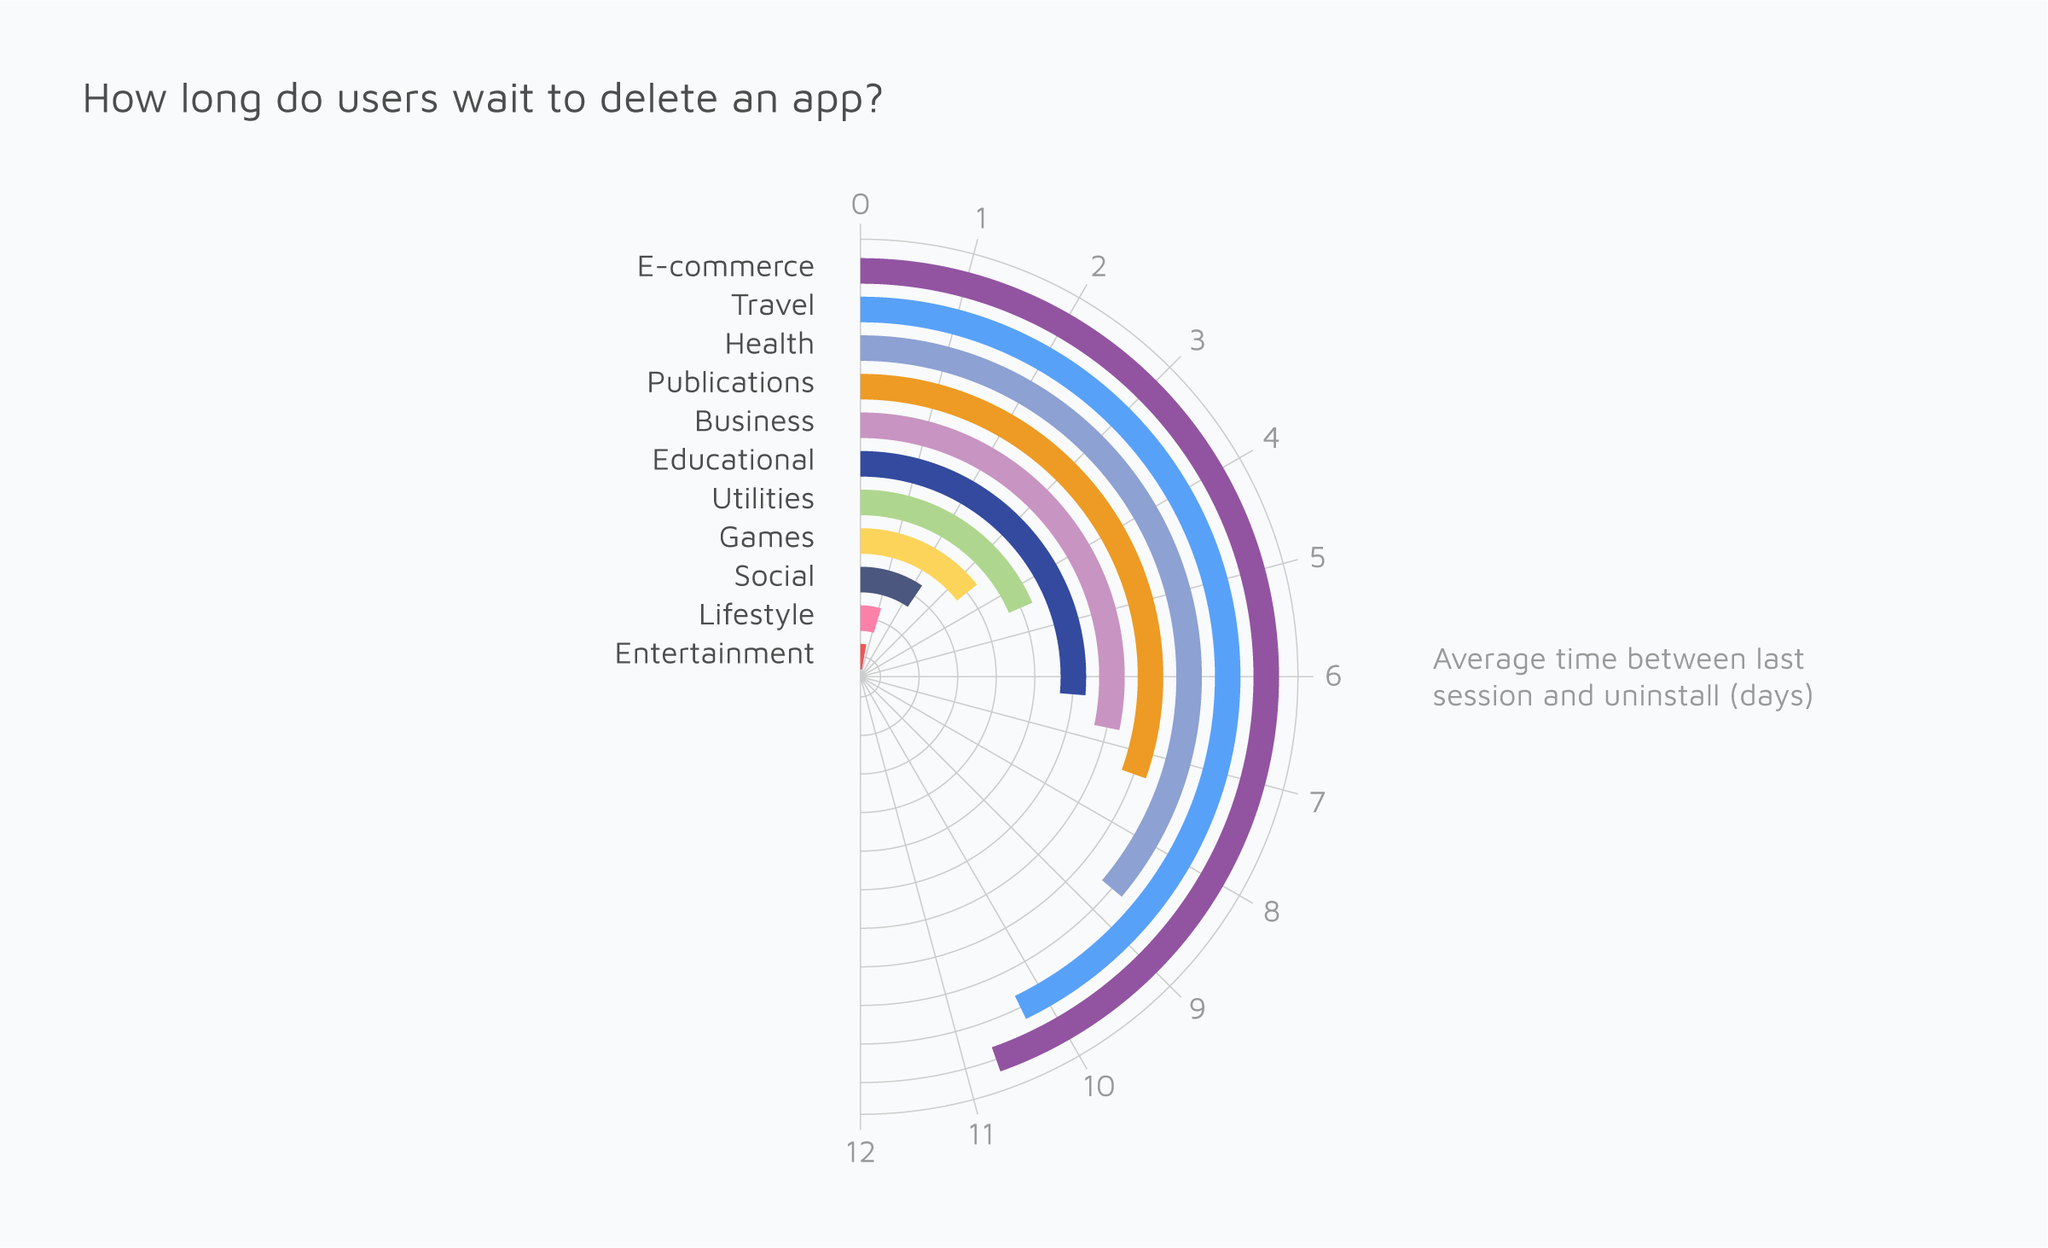 Graphic based upon an Adjust analysis of 8 billion app installs from January through July 2018.